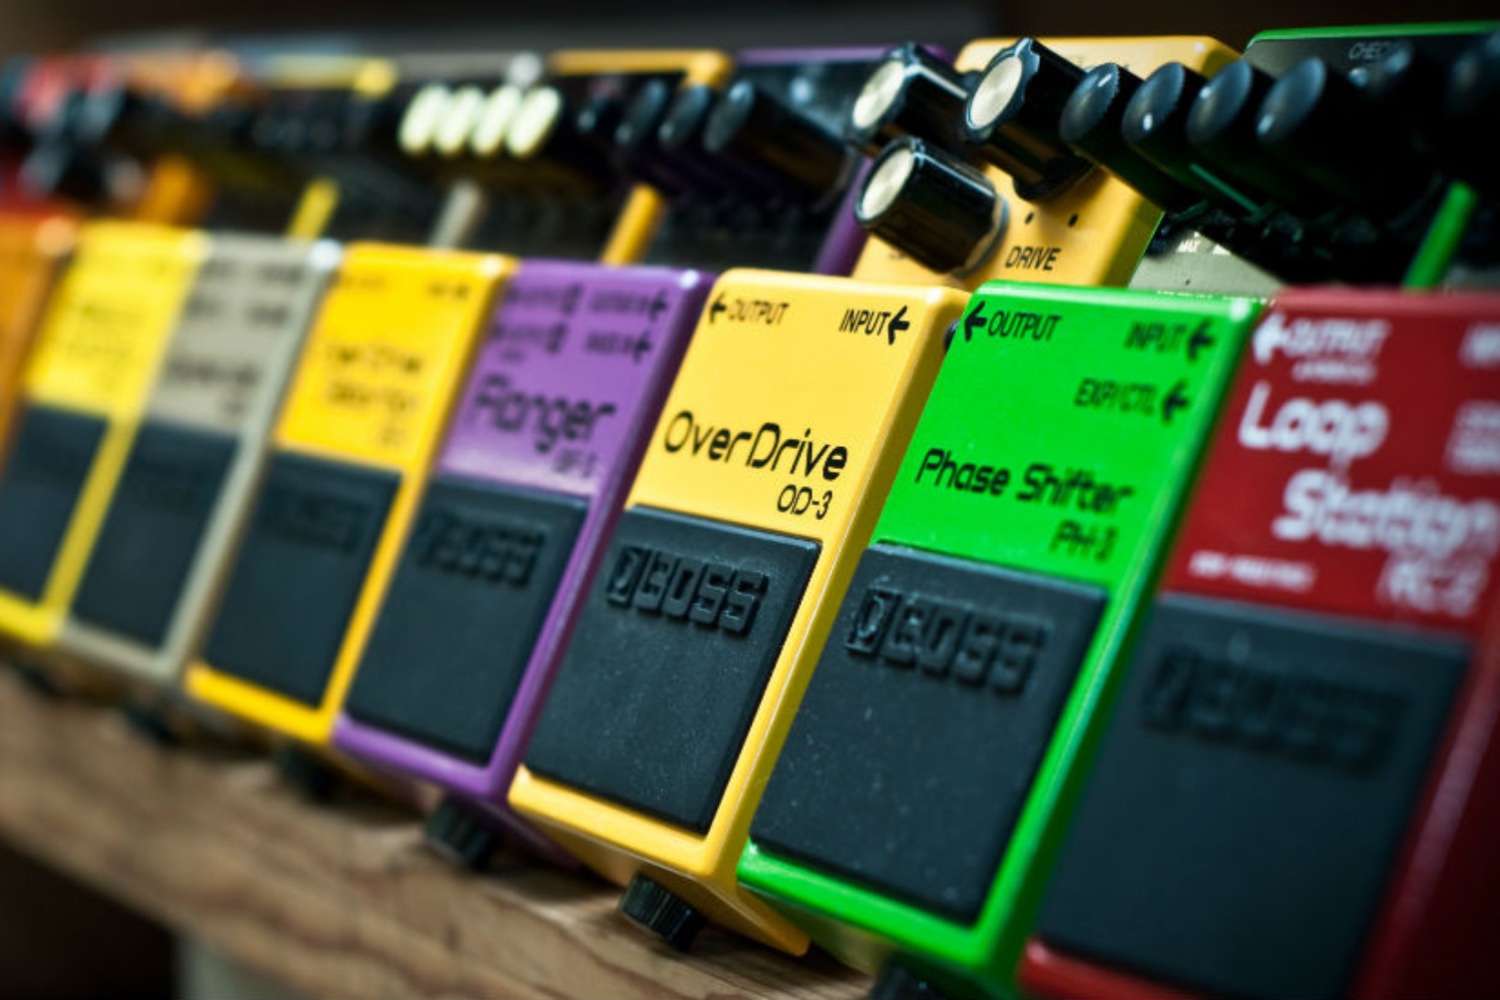 Boss' Best Selling Pedals | The Gear Page